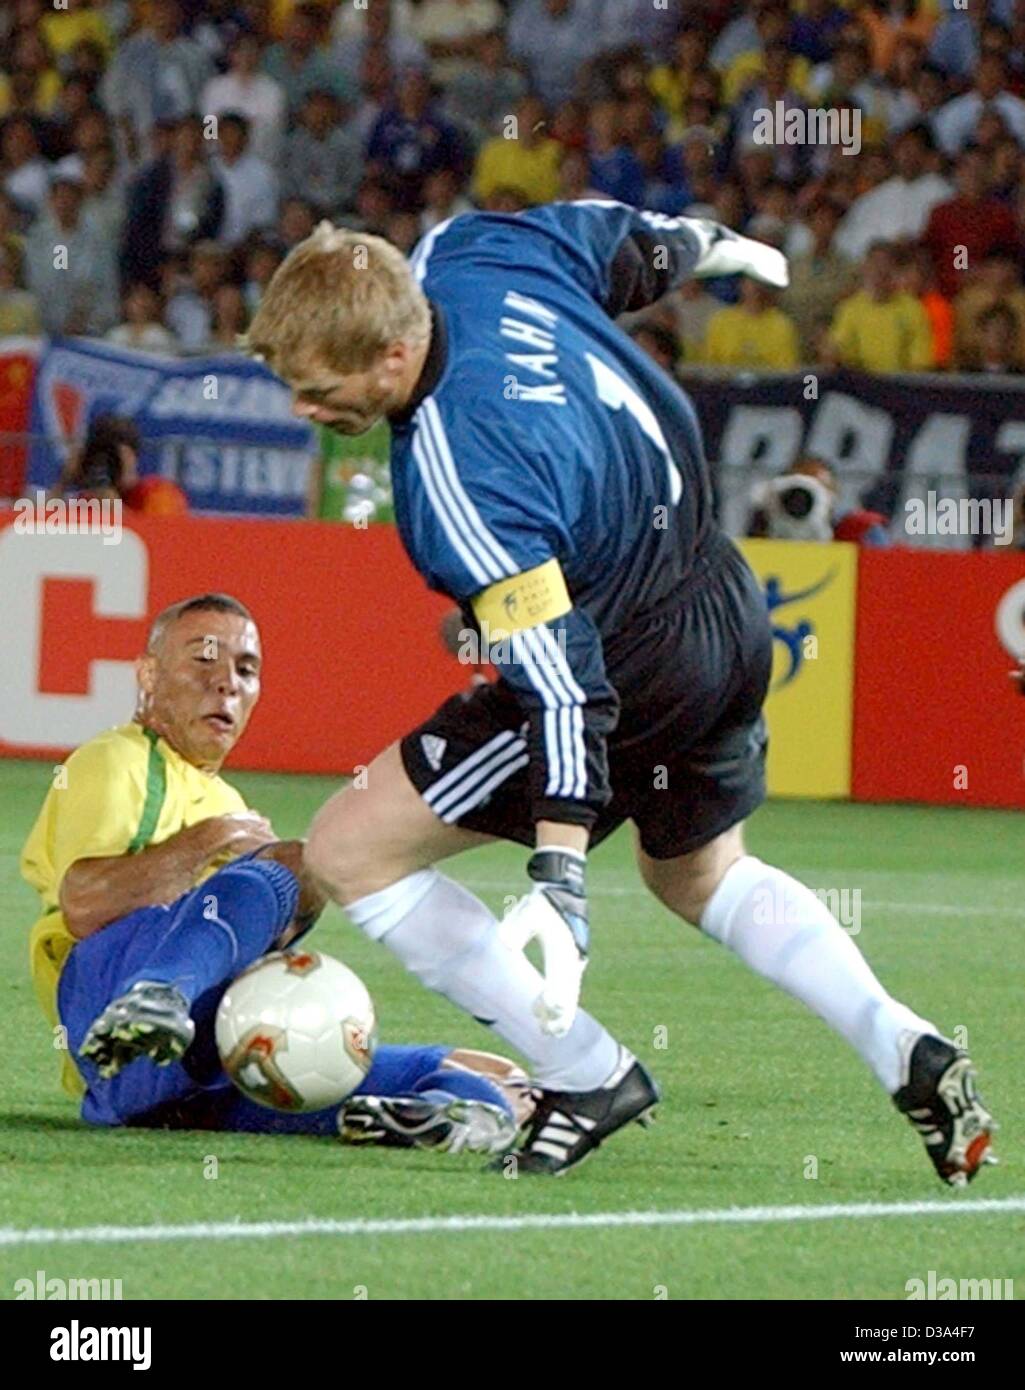 (dpa) - German goalkeeper Oliver Kahn (R) saves a ball from Brazlian striker Ronaldo during the FIFA World Cup final opposing Germany and Brazil in Yokohama, Japan, 30 June 2002. The match ended 2:0 for Brazil, both goals scored by Ronaldo, making Brazil a record five-time world champion and Germany Stock Photo